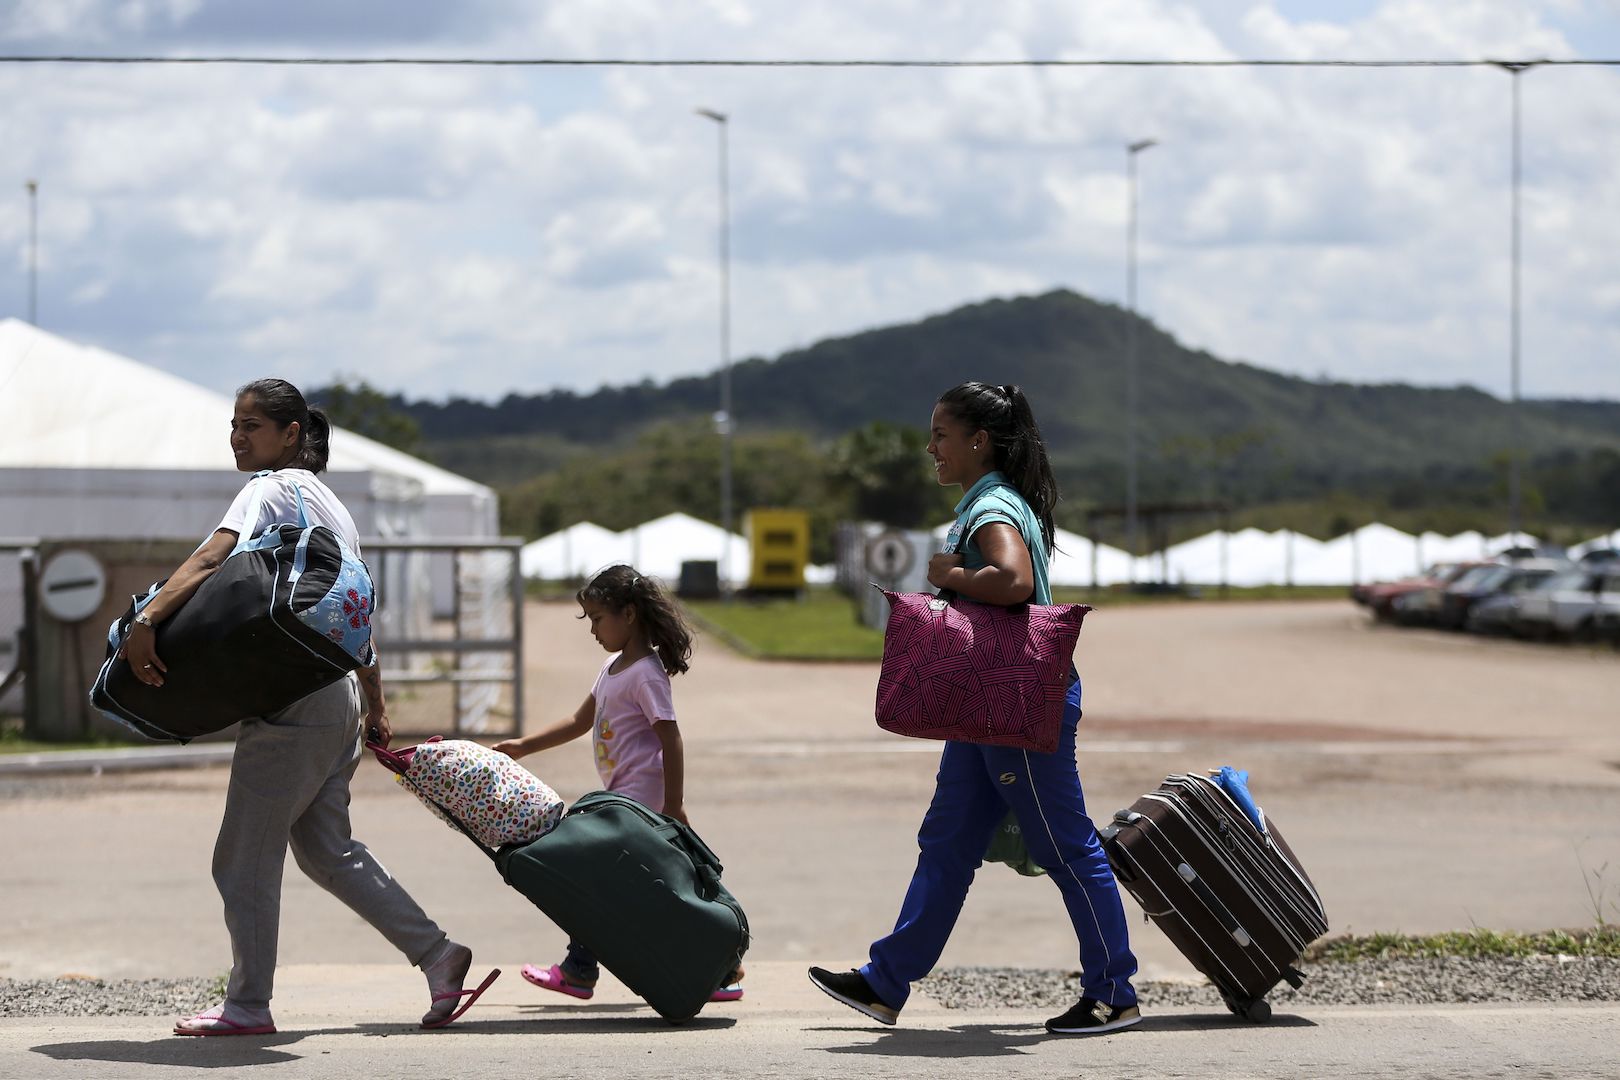 Brazil,Venezuelan refugees are heading out to new Brazilian cities as resistance to them in Roraima state increases,